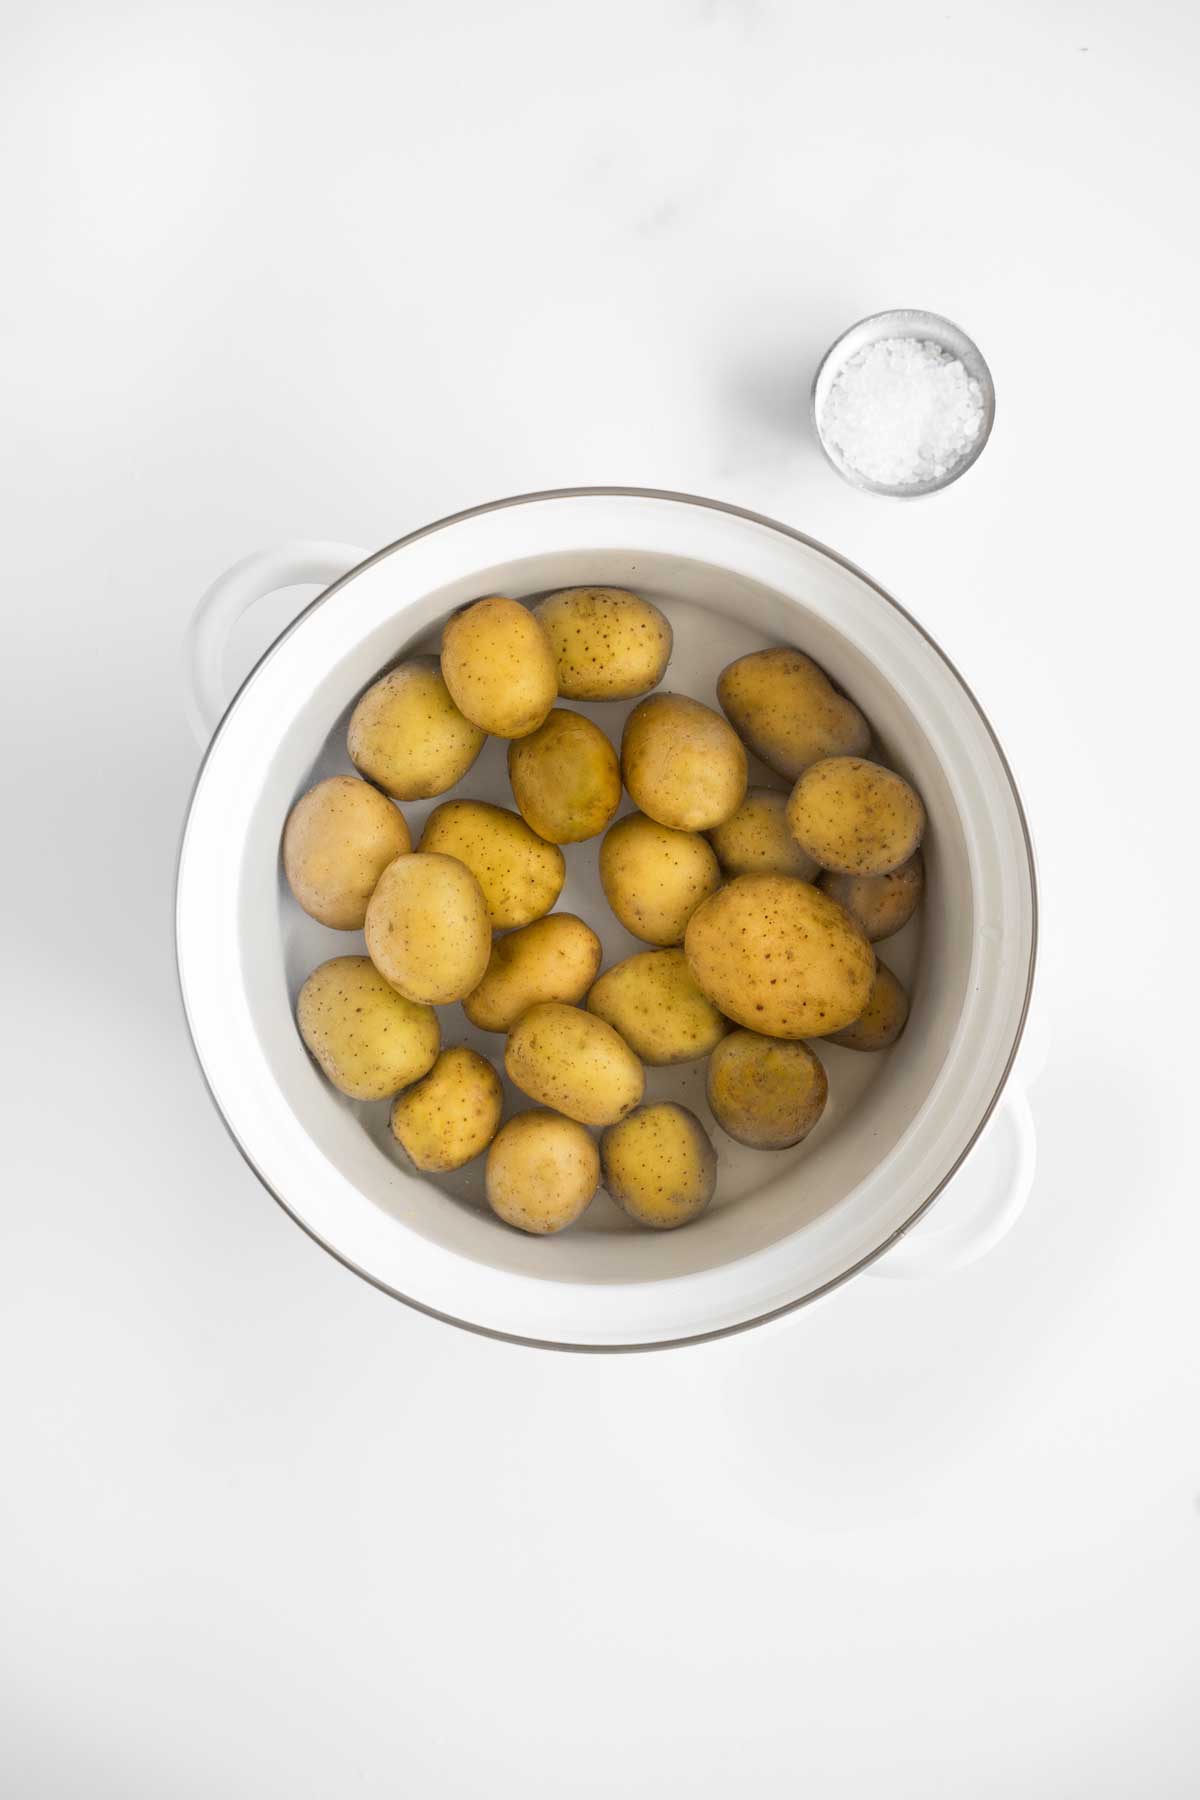 Baby potatoes in a white pot with water.